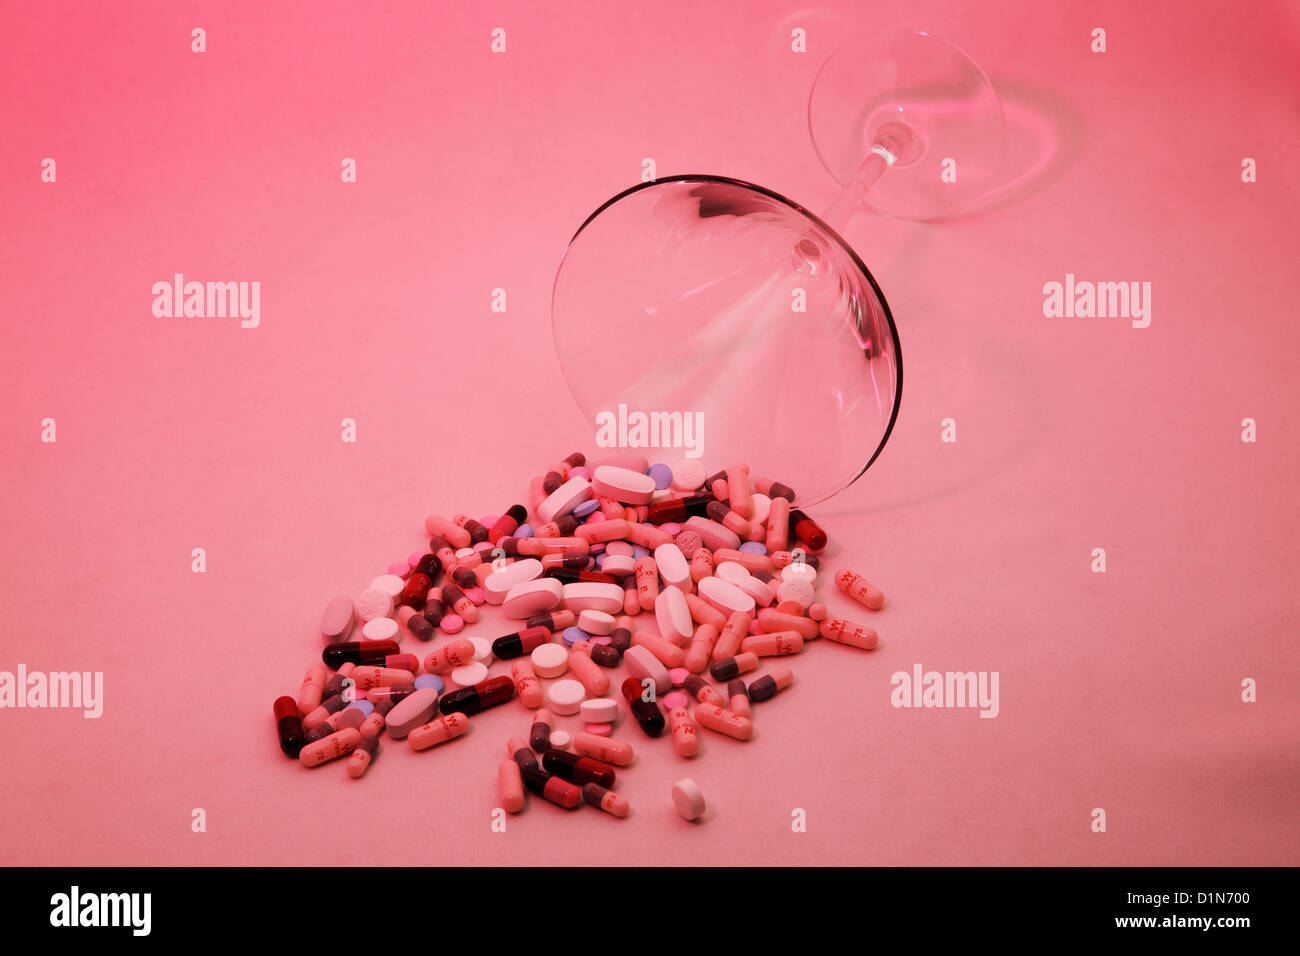 Prescription pills, tablets, capsules spilling from martini glass. Red background Stock Photo